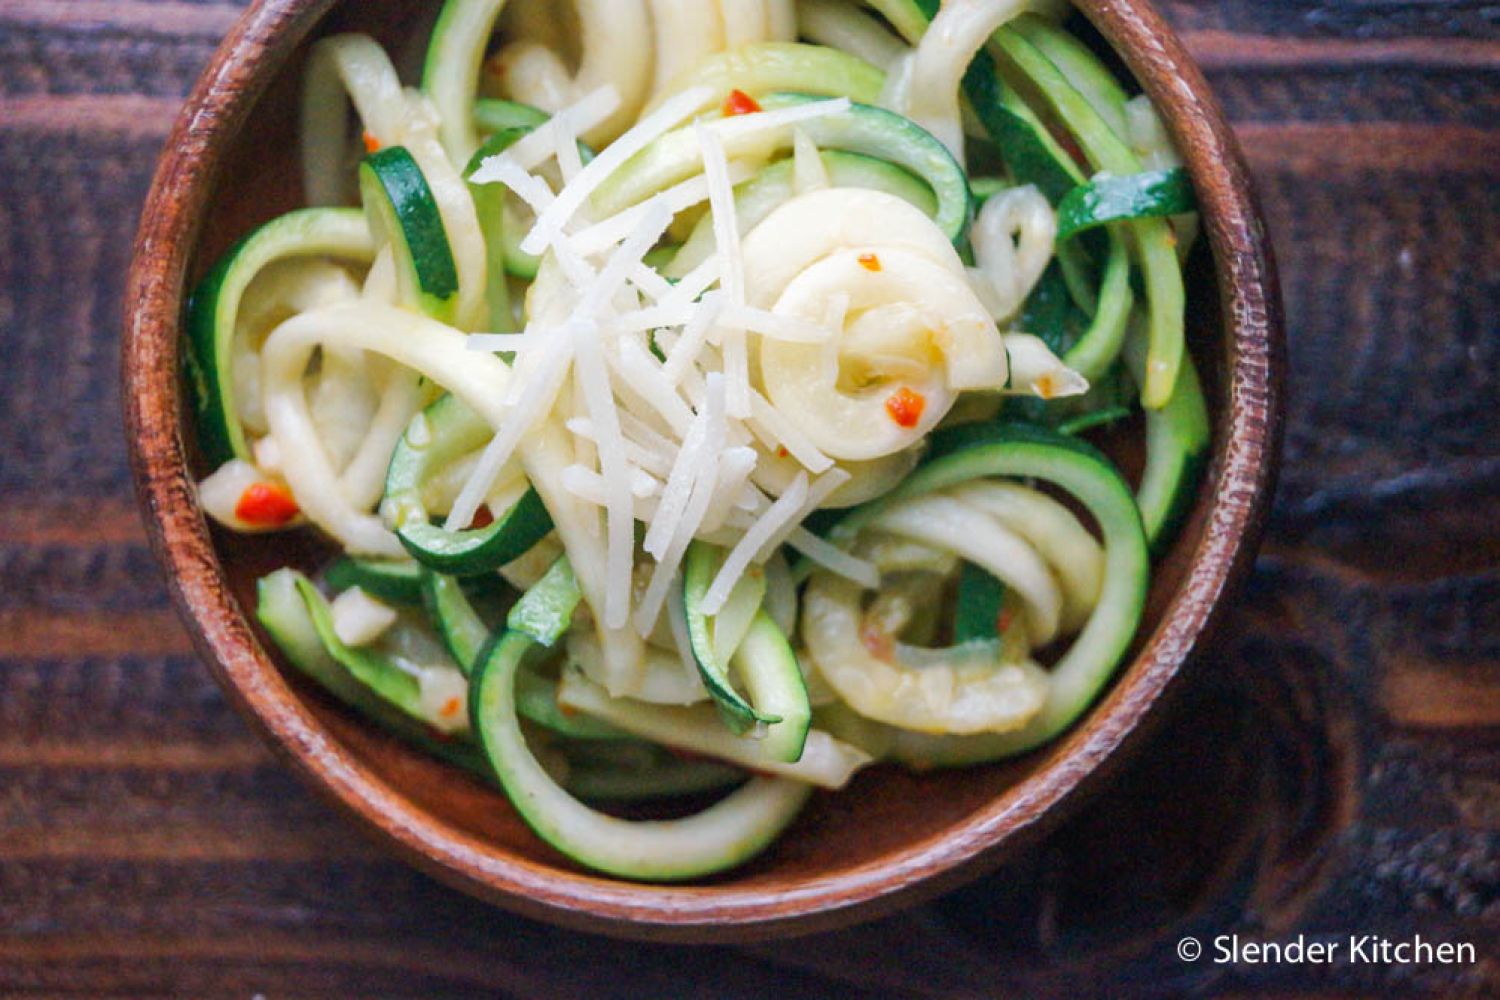 Parmesan zucchini noodles with shredded Parmesan cheese, red pepper flakes, and black pepper in a wooden bowl.